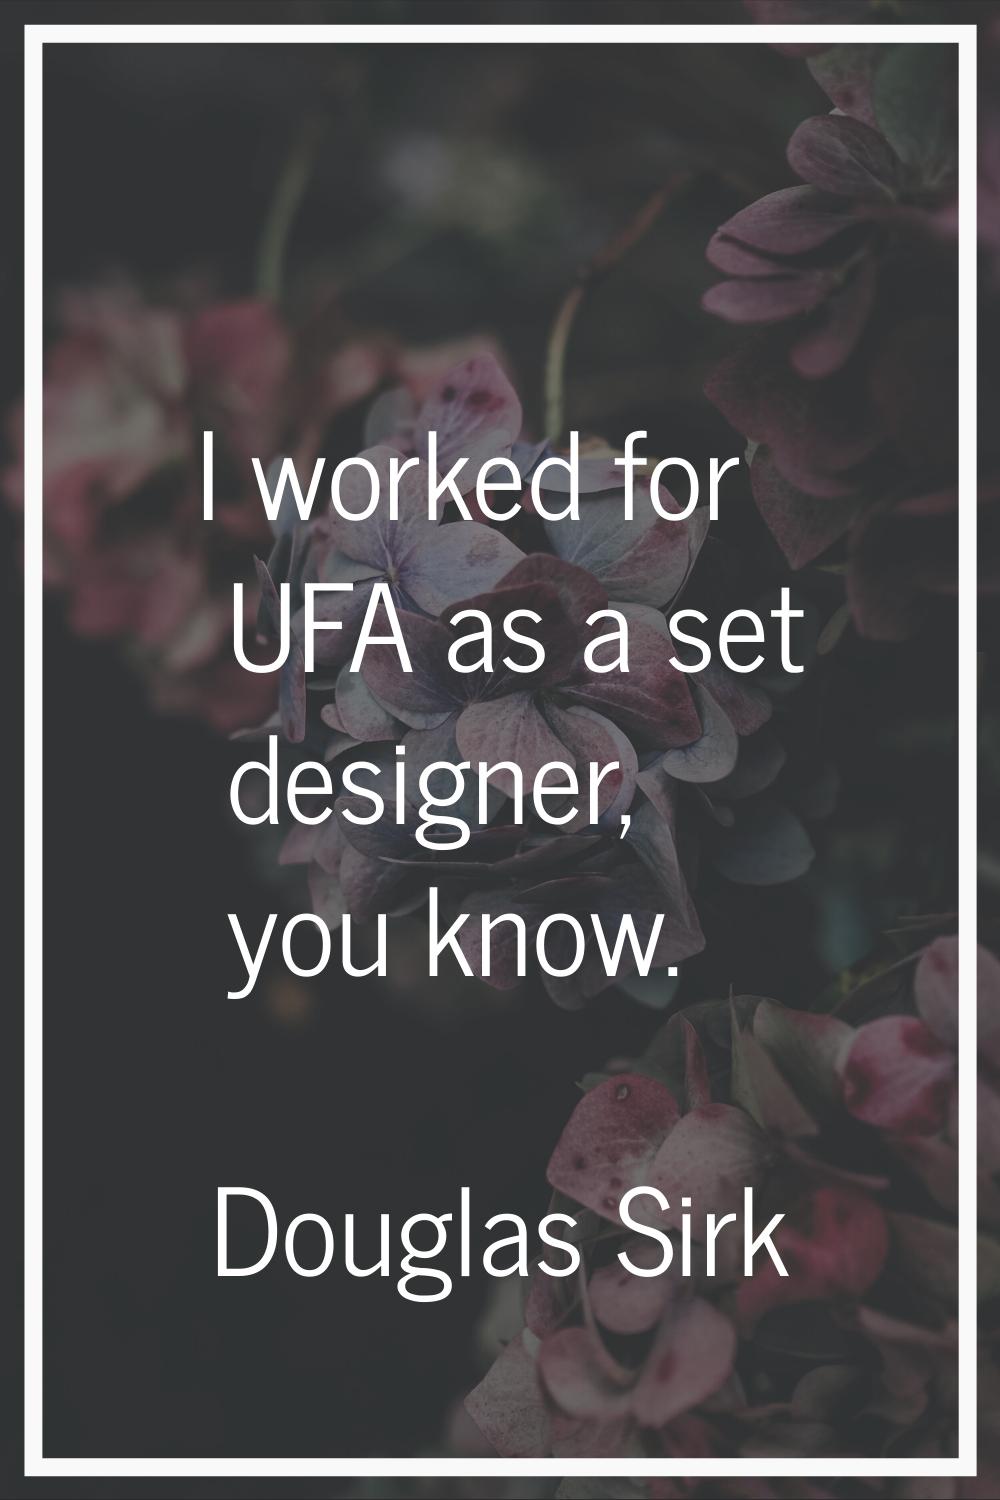 I worked for UFA as a set designer, you know.